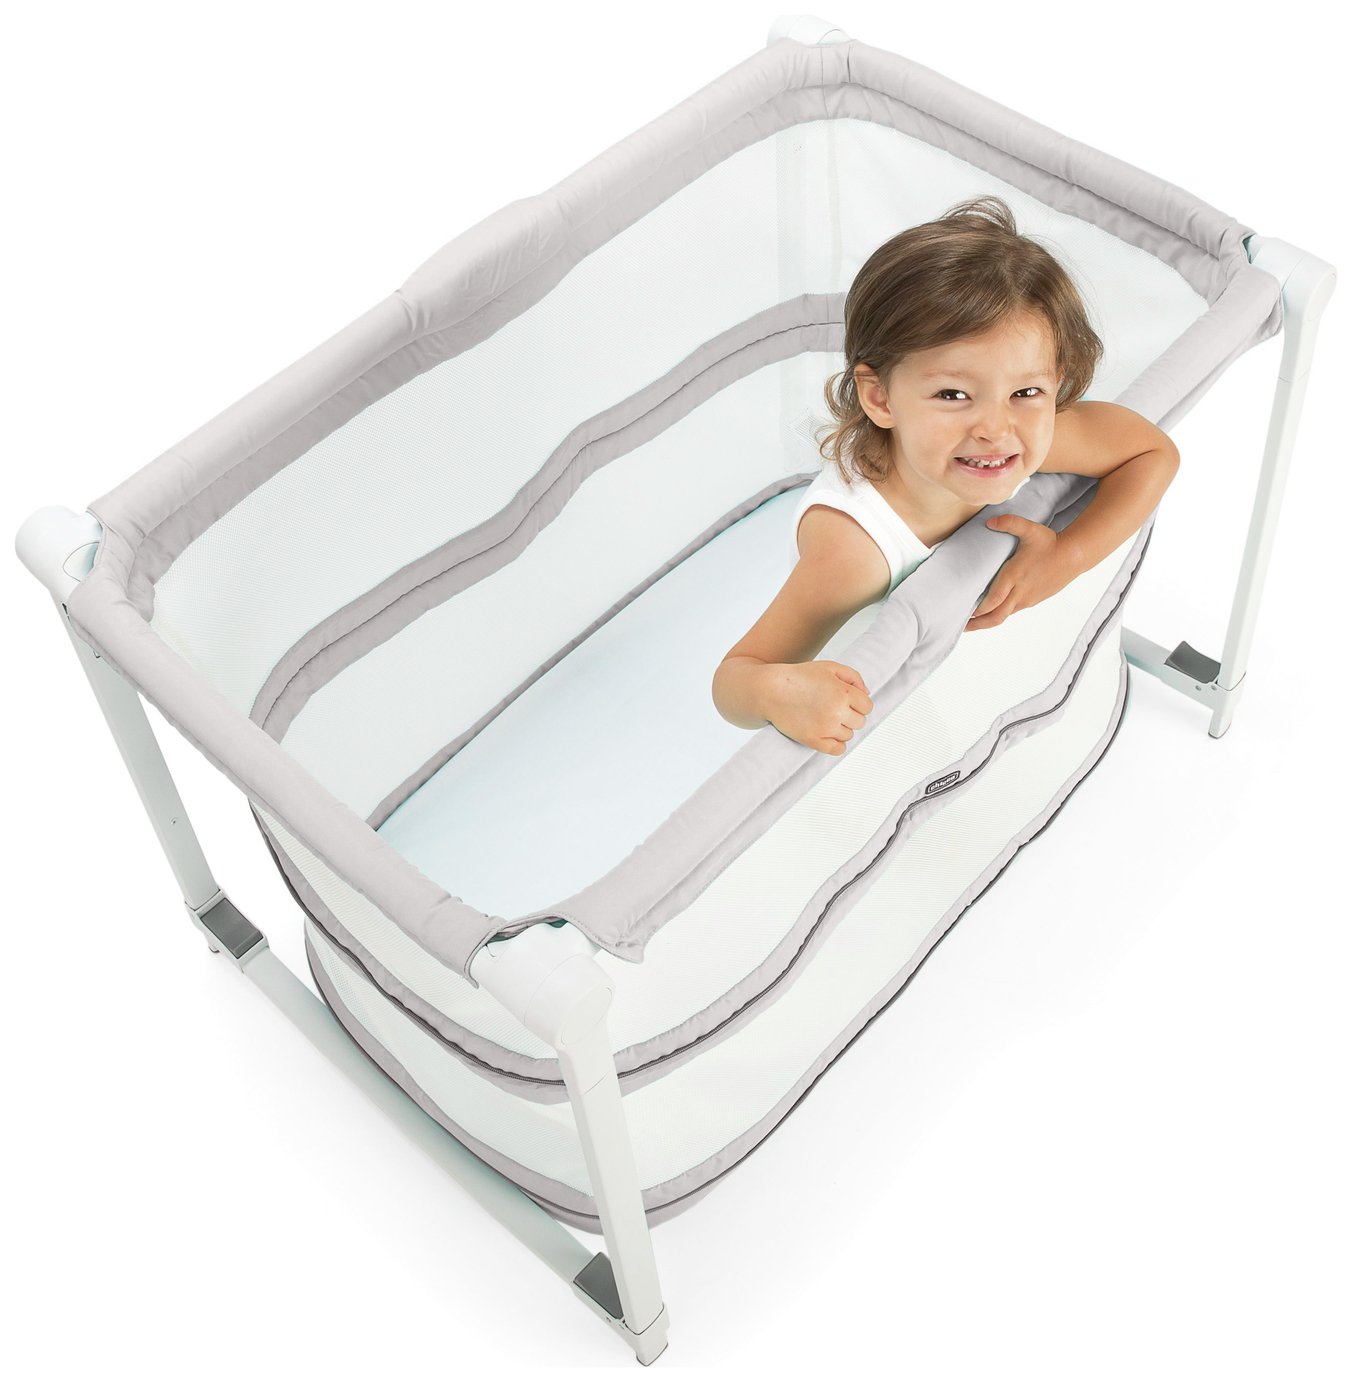 Chicco Zip n Go Travel Crib Review